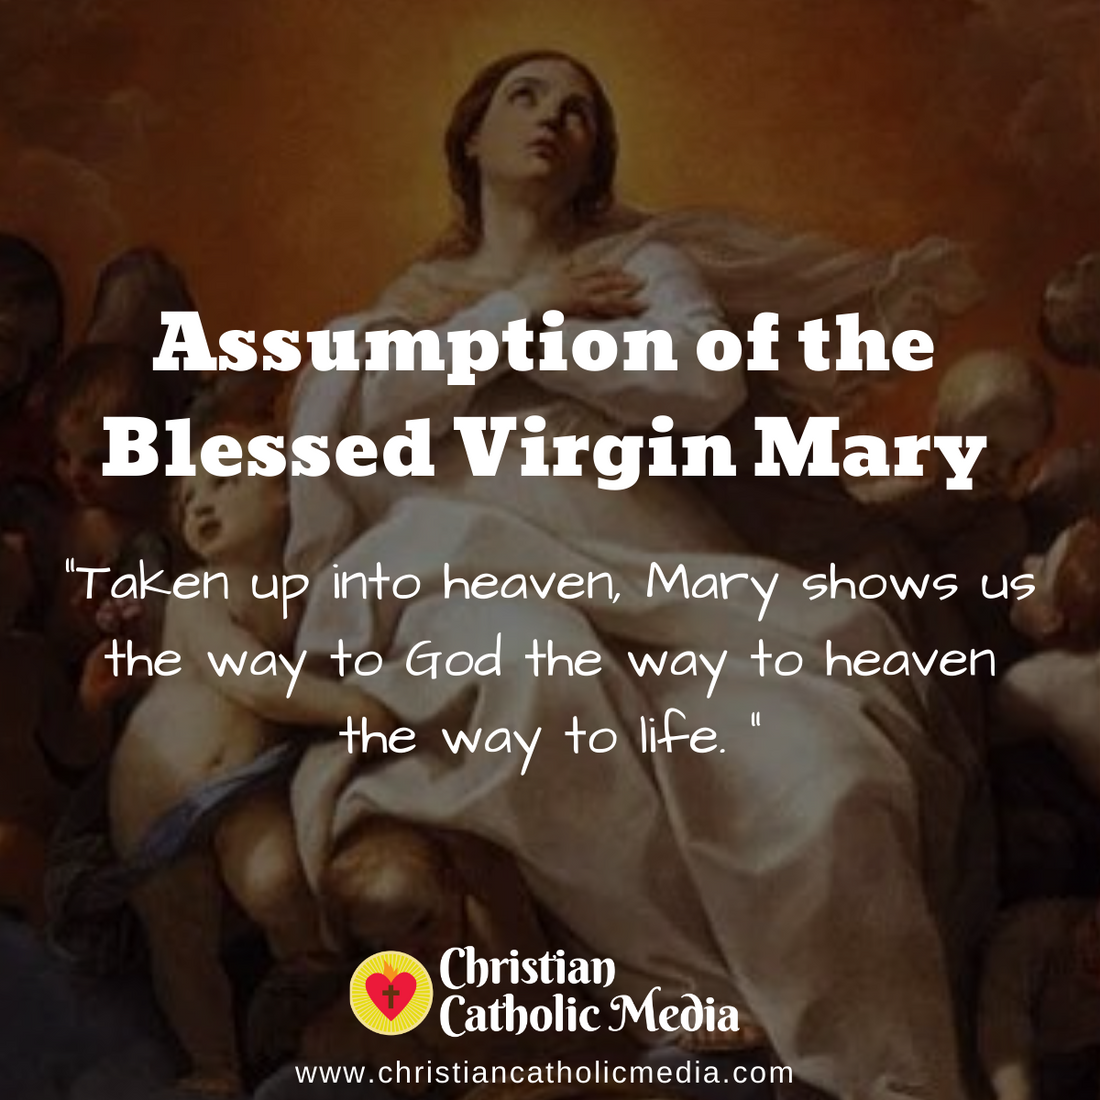 Assumption of the Blessed Virgin Mary - Sunday August 15, 2021